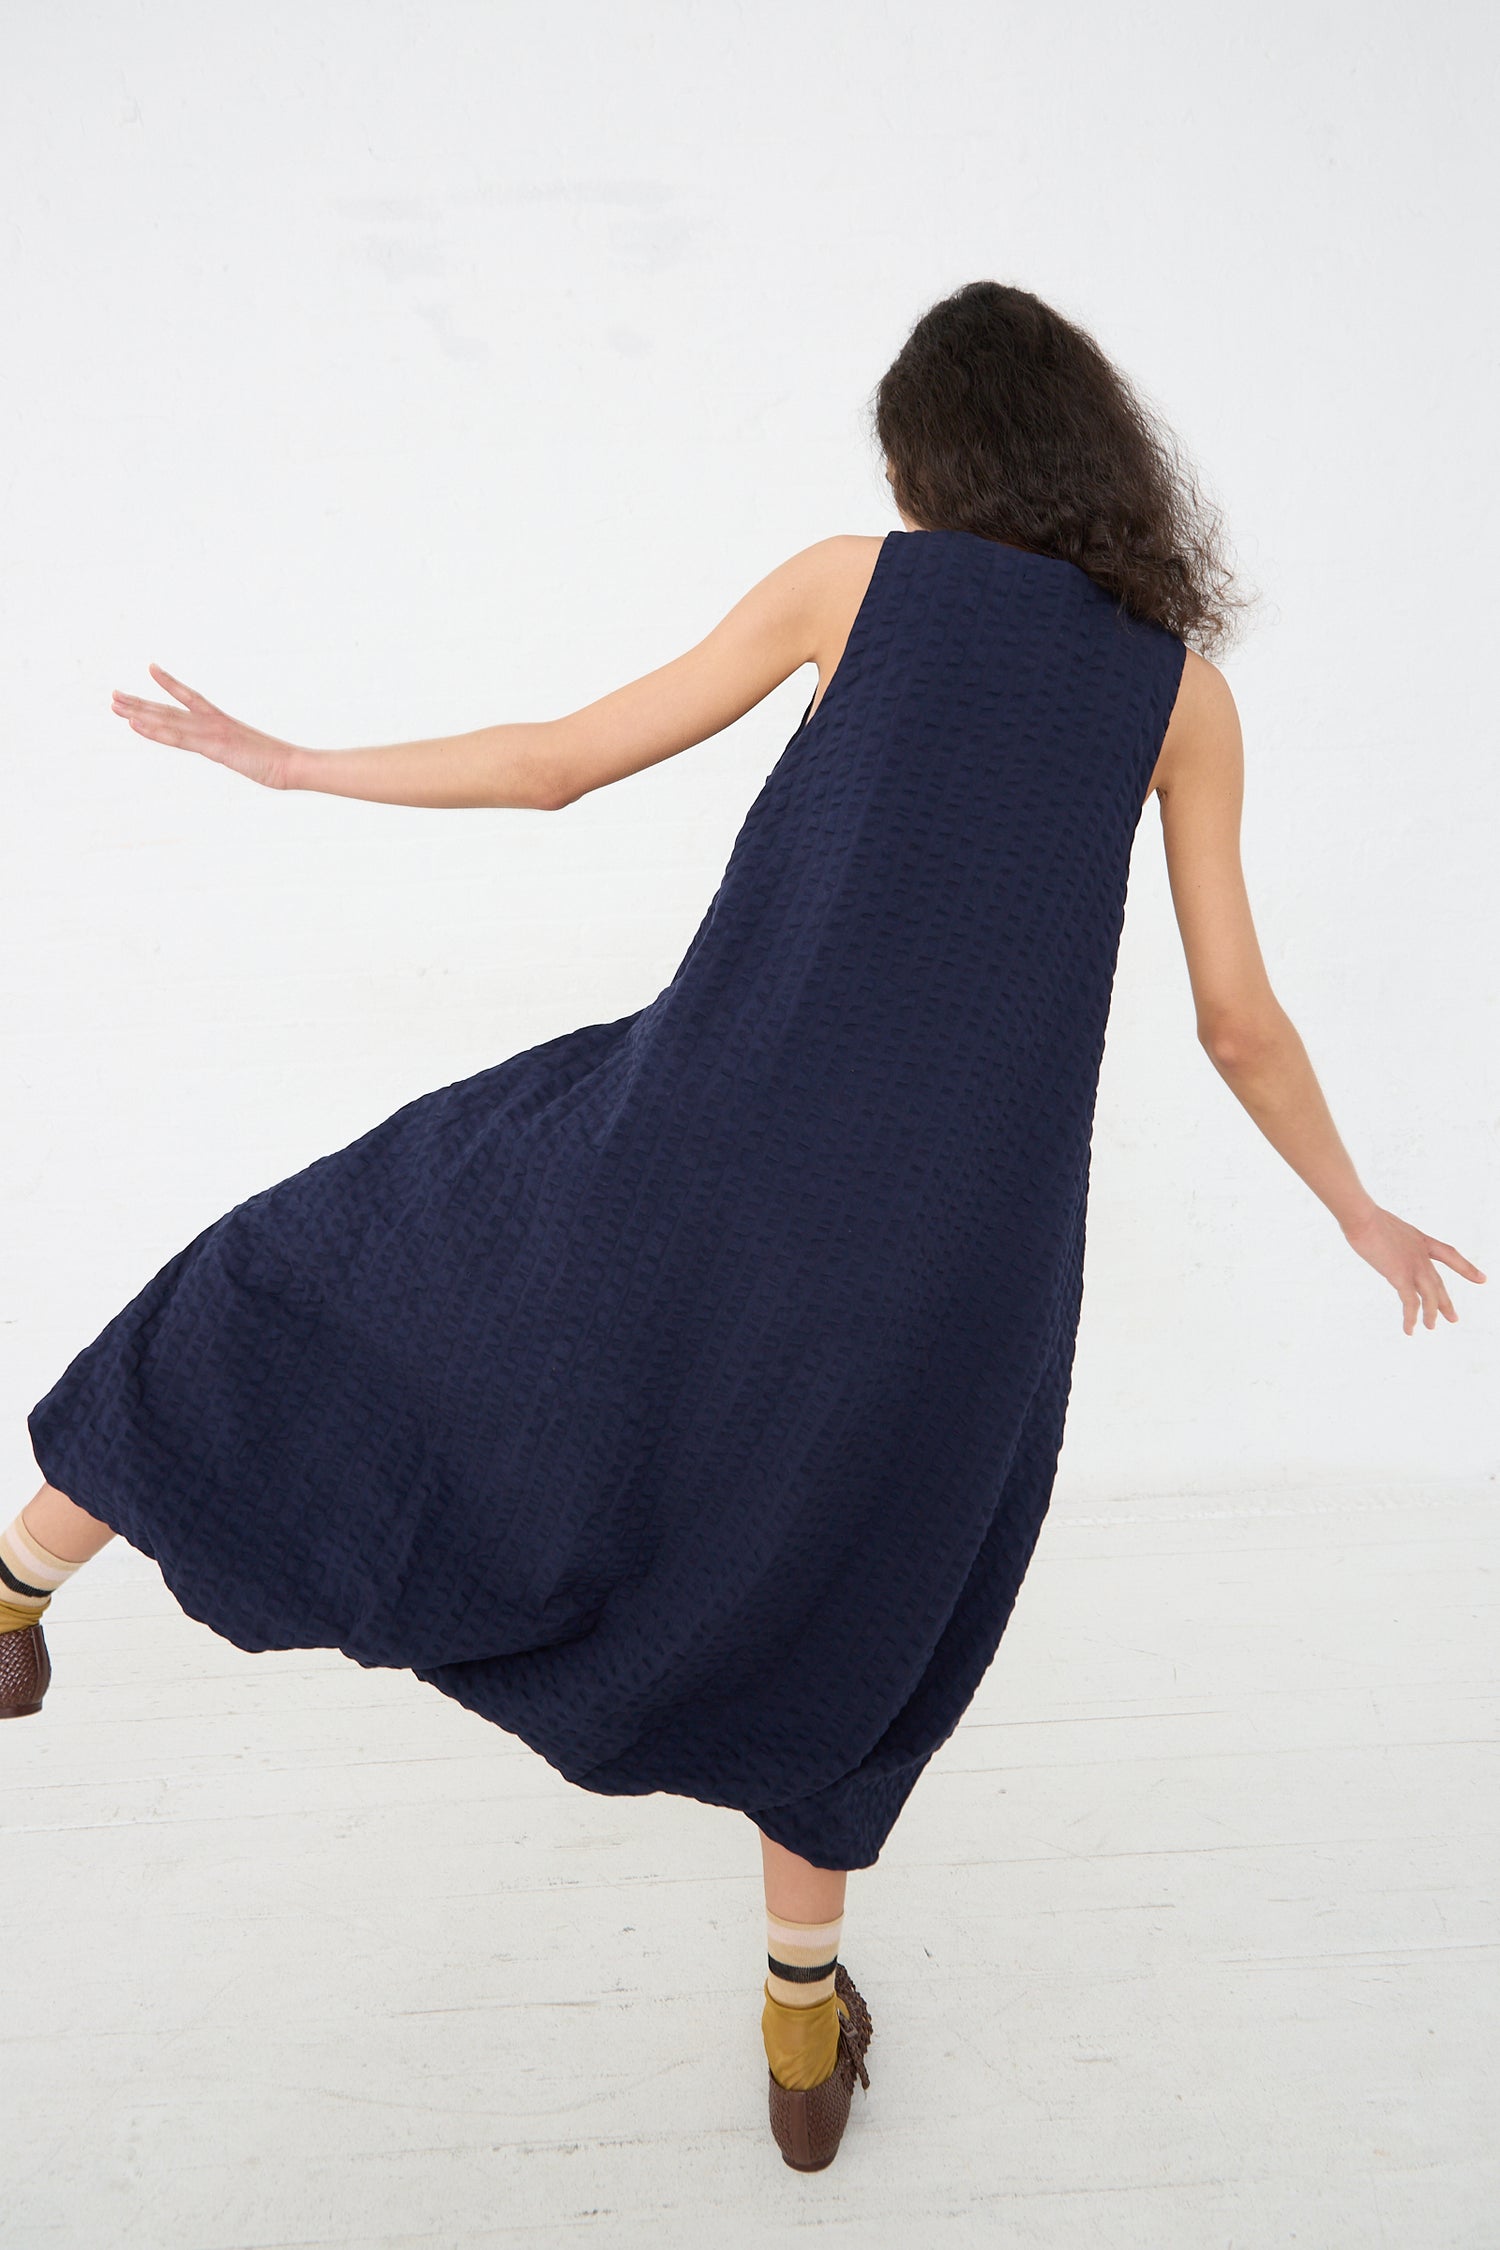 A woman with curly hair twirls in a spacious room while wearing a Navy Cotton Seersucker Parachute Dress from Black Crane and brown shoes.